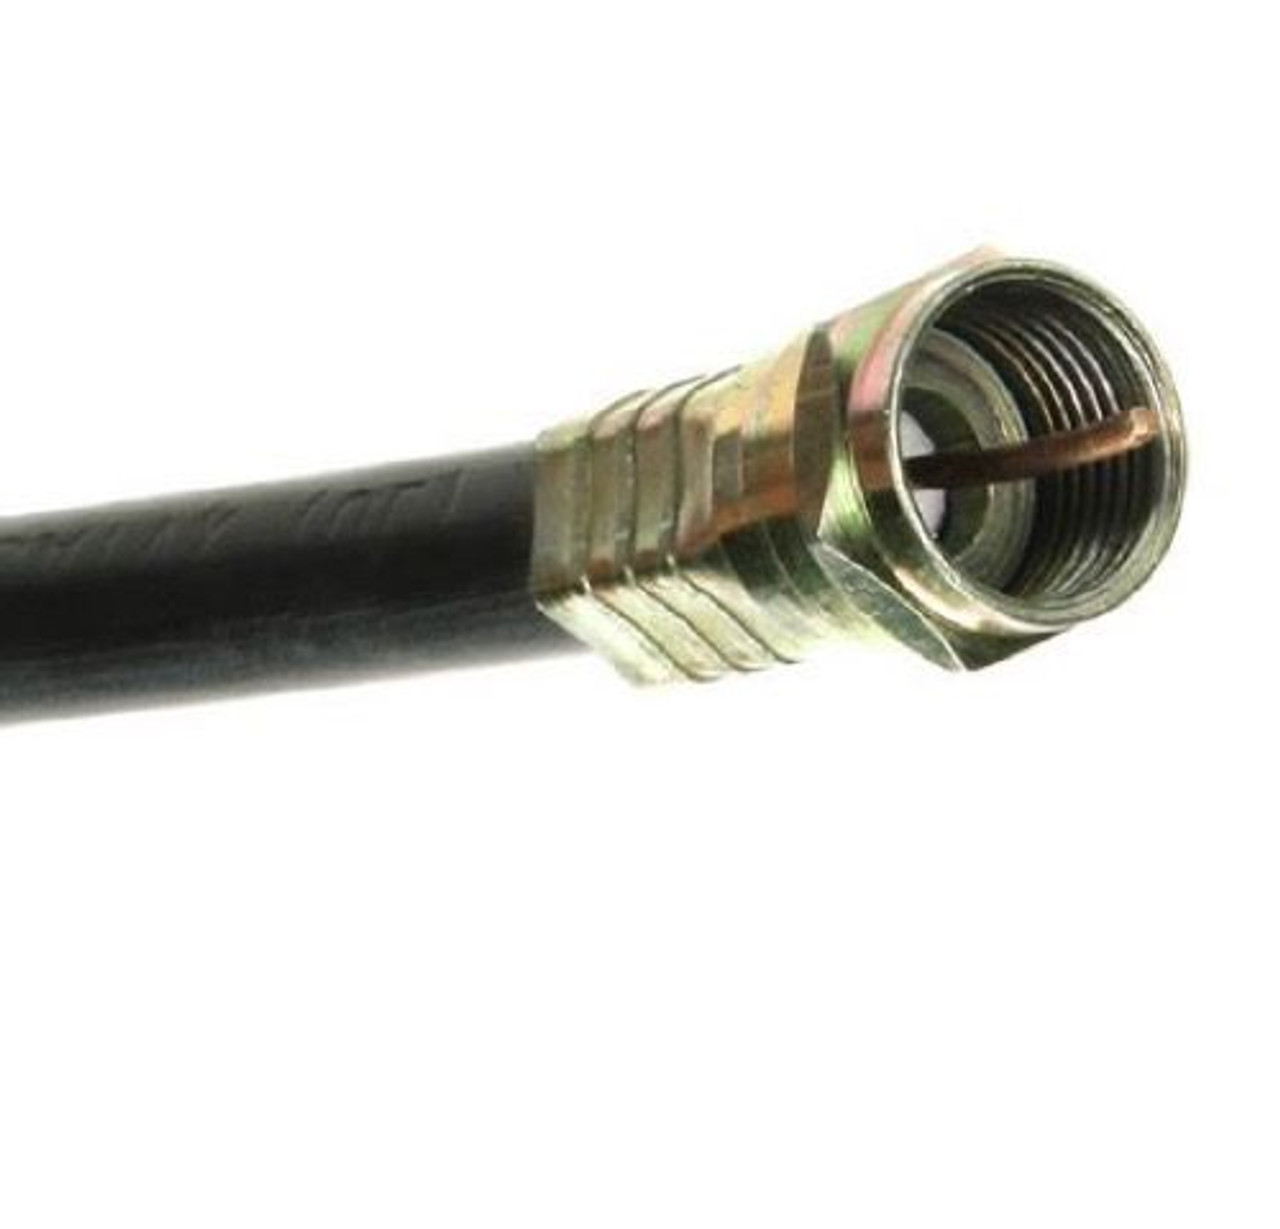 Eagle 8' FT RG6 Coaxial Cable Black with Gold F Connector Installed Each End RG-6 F to F Audio Video Signal 75 Ohm Component Shielded Connector HDTV Jumper